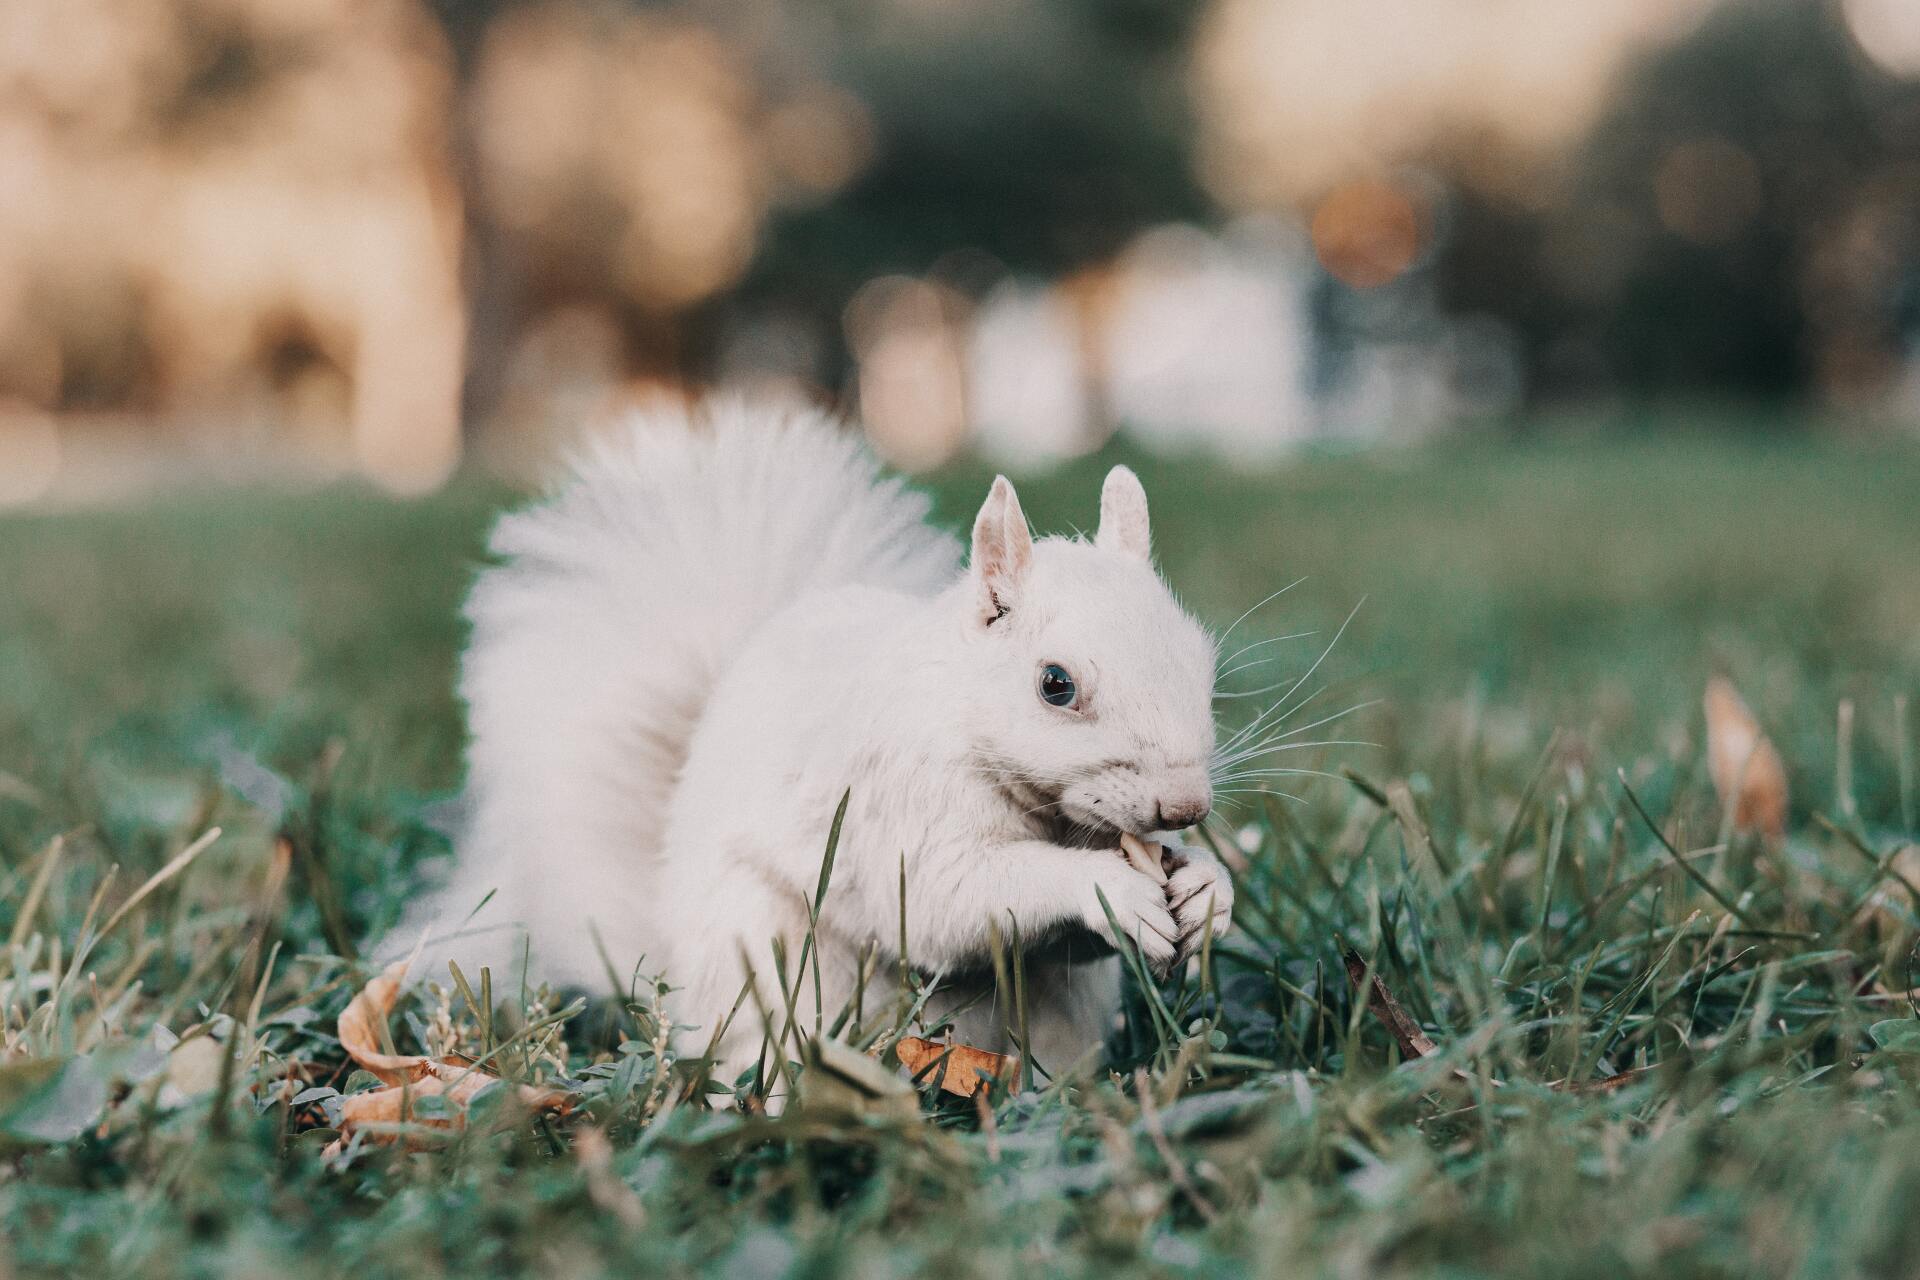 A white squirrel is eating a nut in the grass.